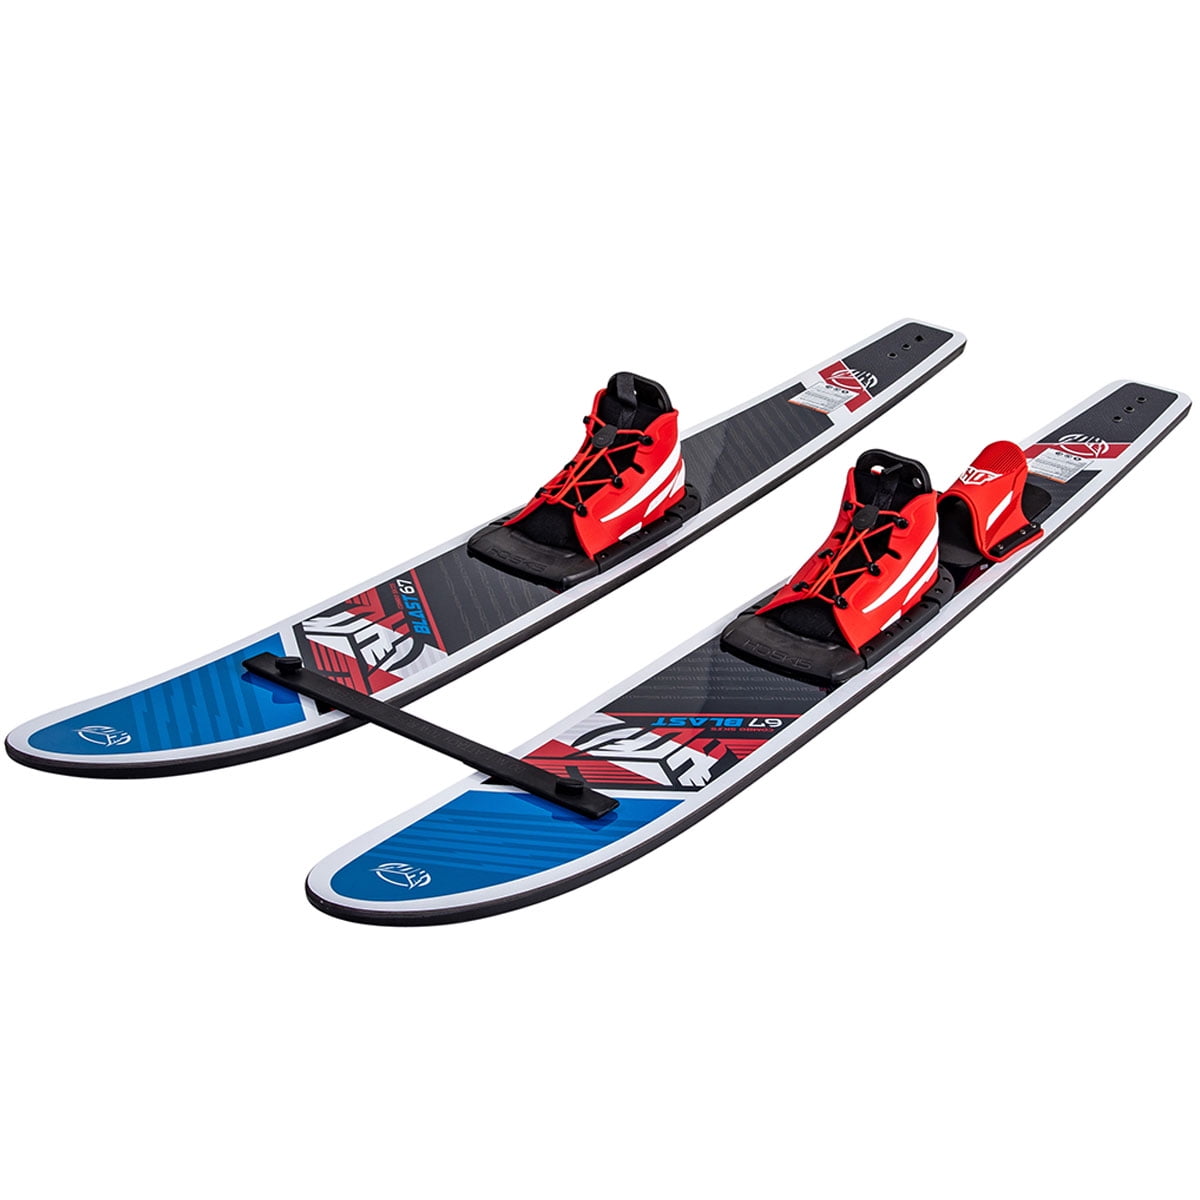 Attached Ski Tips Together 2021 HO Sports Waterski Combo Bar Trainer 